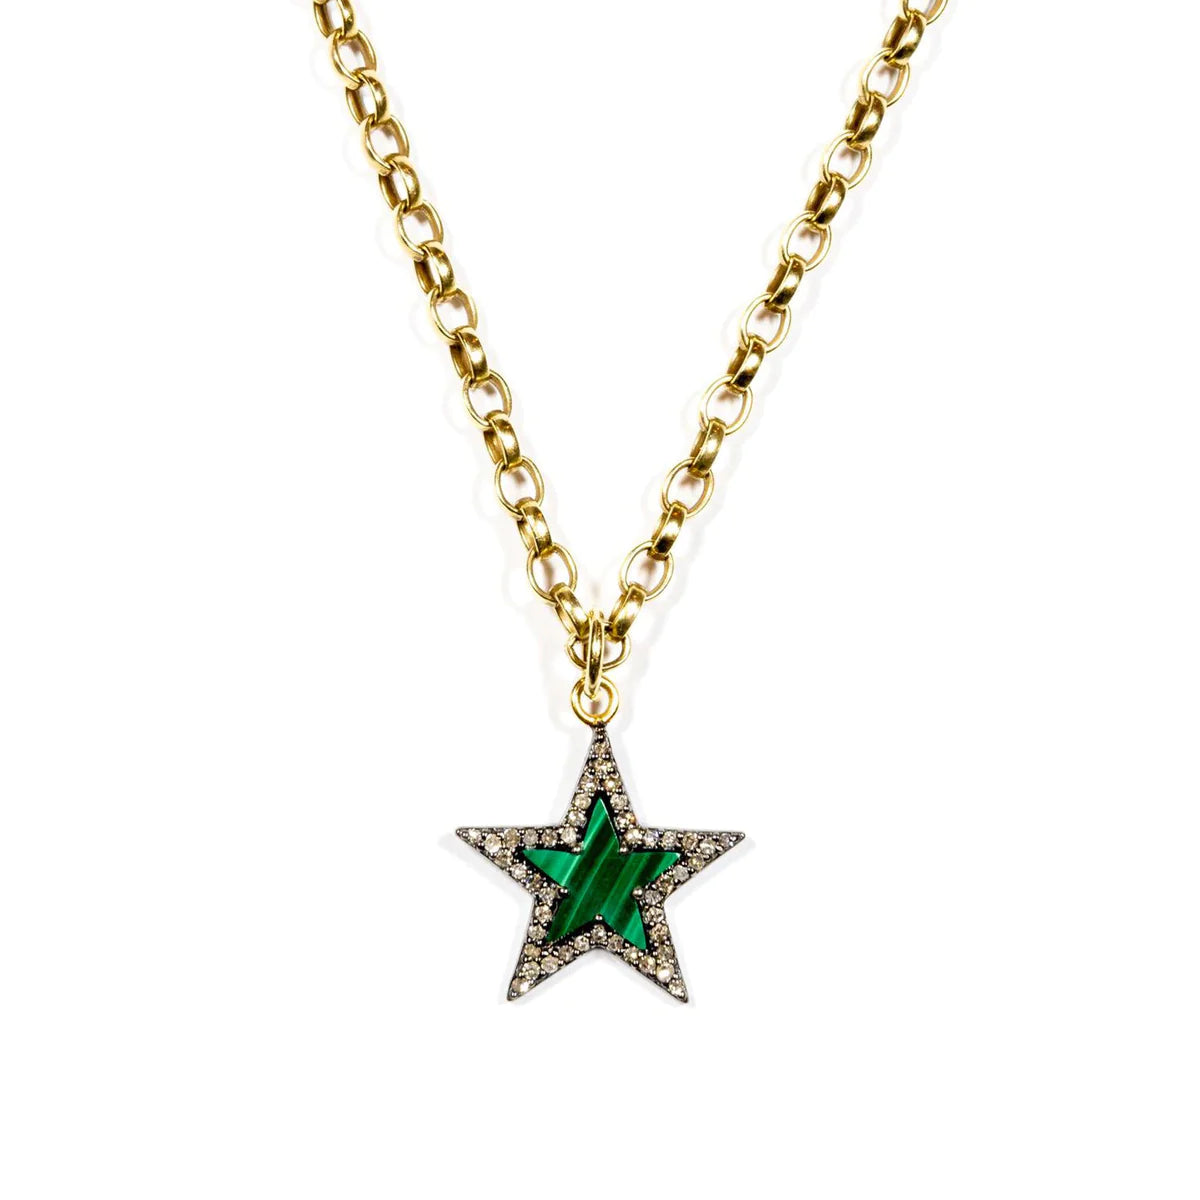 Green malachite star pendant necklace with pave diamond surroundings and a gold plated belcher chain